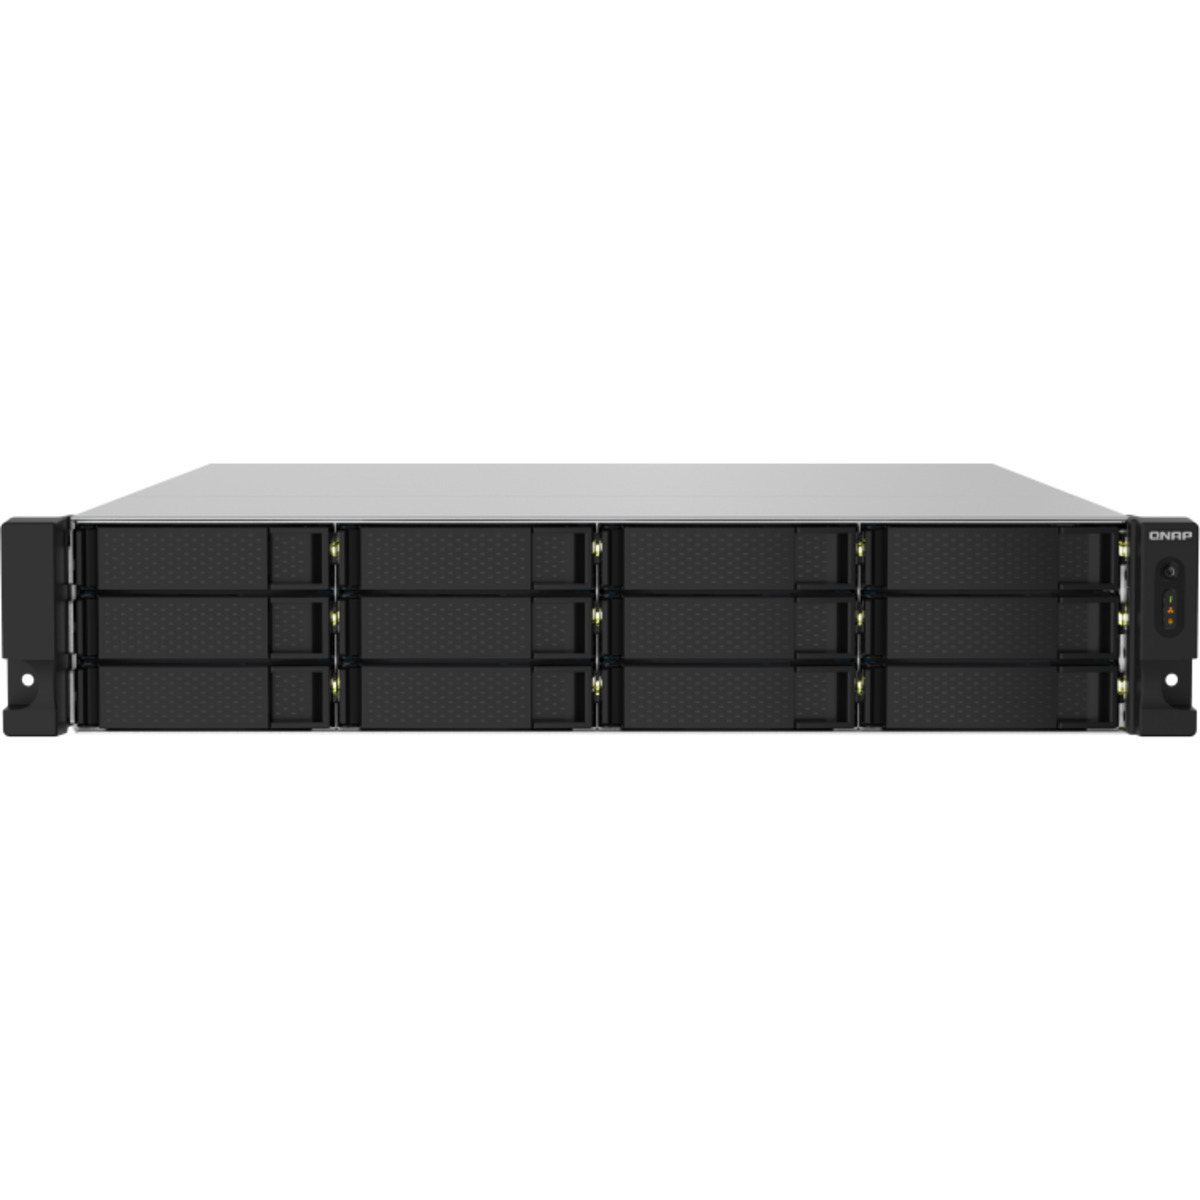 buy $2574 QNAP TS-1232PXU-RP 24tb RackMount NAS - Network Attached Storage Device 12x2000gb Seagate BarraCuda ST2000DM008 3.5 7200rpm SATA 6Gb/s HDD CONSUMER Class Drives Installed - Burn-In Tested - ON SALE - FREE RAM UPGRADE - nas headquarters buy network attached storage server device das new raid-5 free shipping usa TS-1232PXU-RP